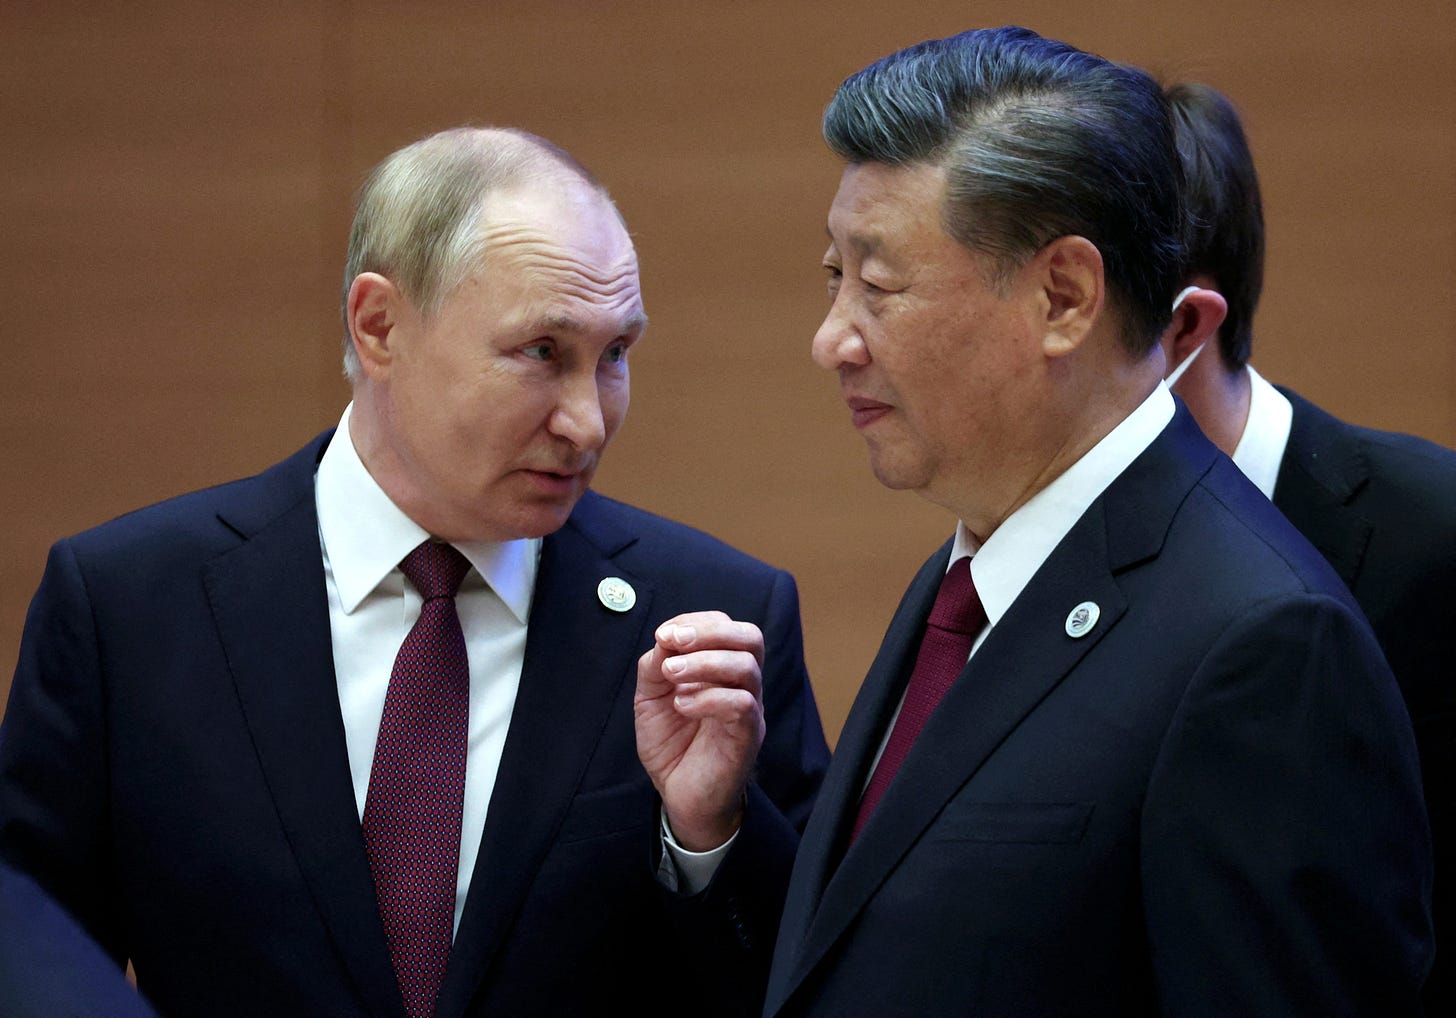 Putin says summit meeting with Xi was "normal" | Reuters